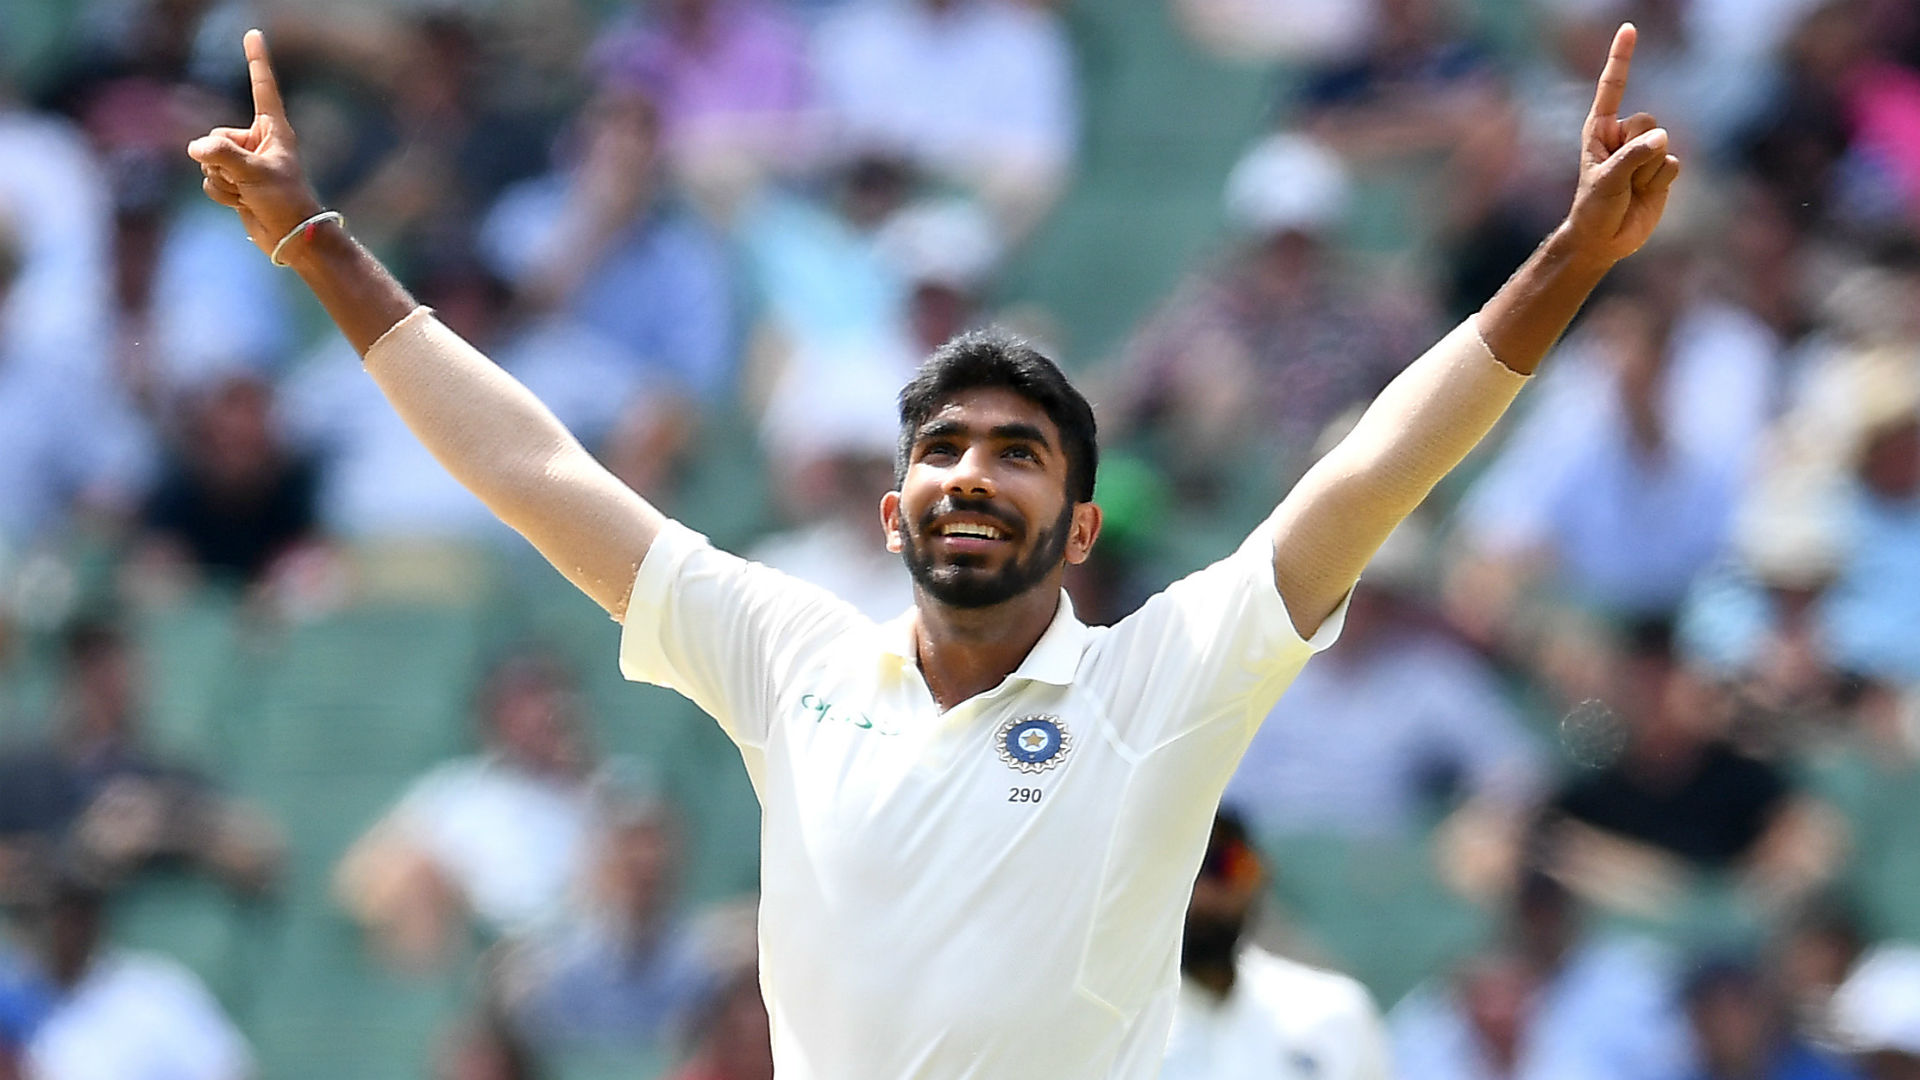 Virat Kohli said India were "lucky" to have Jasprit Bumrah after he starred with the ball in the Test series success over West Indies.